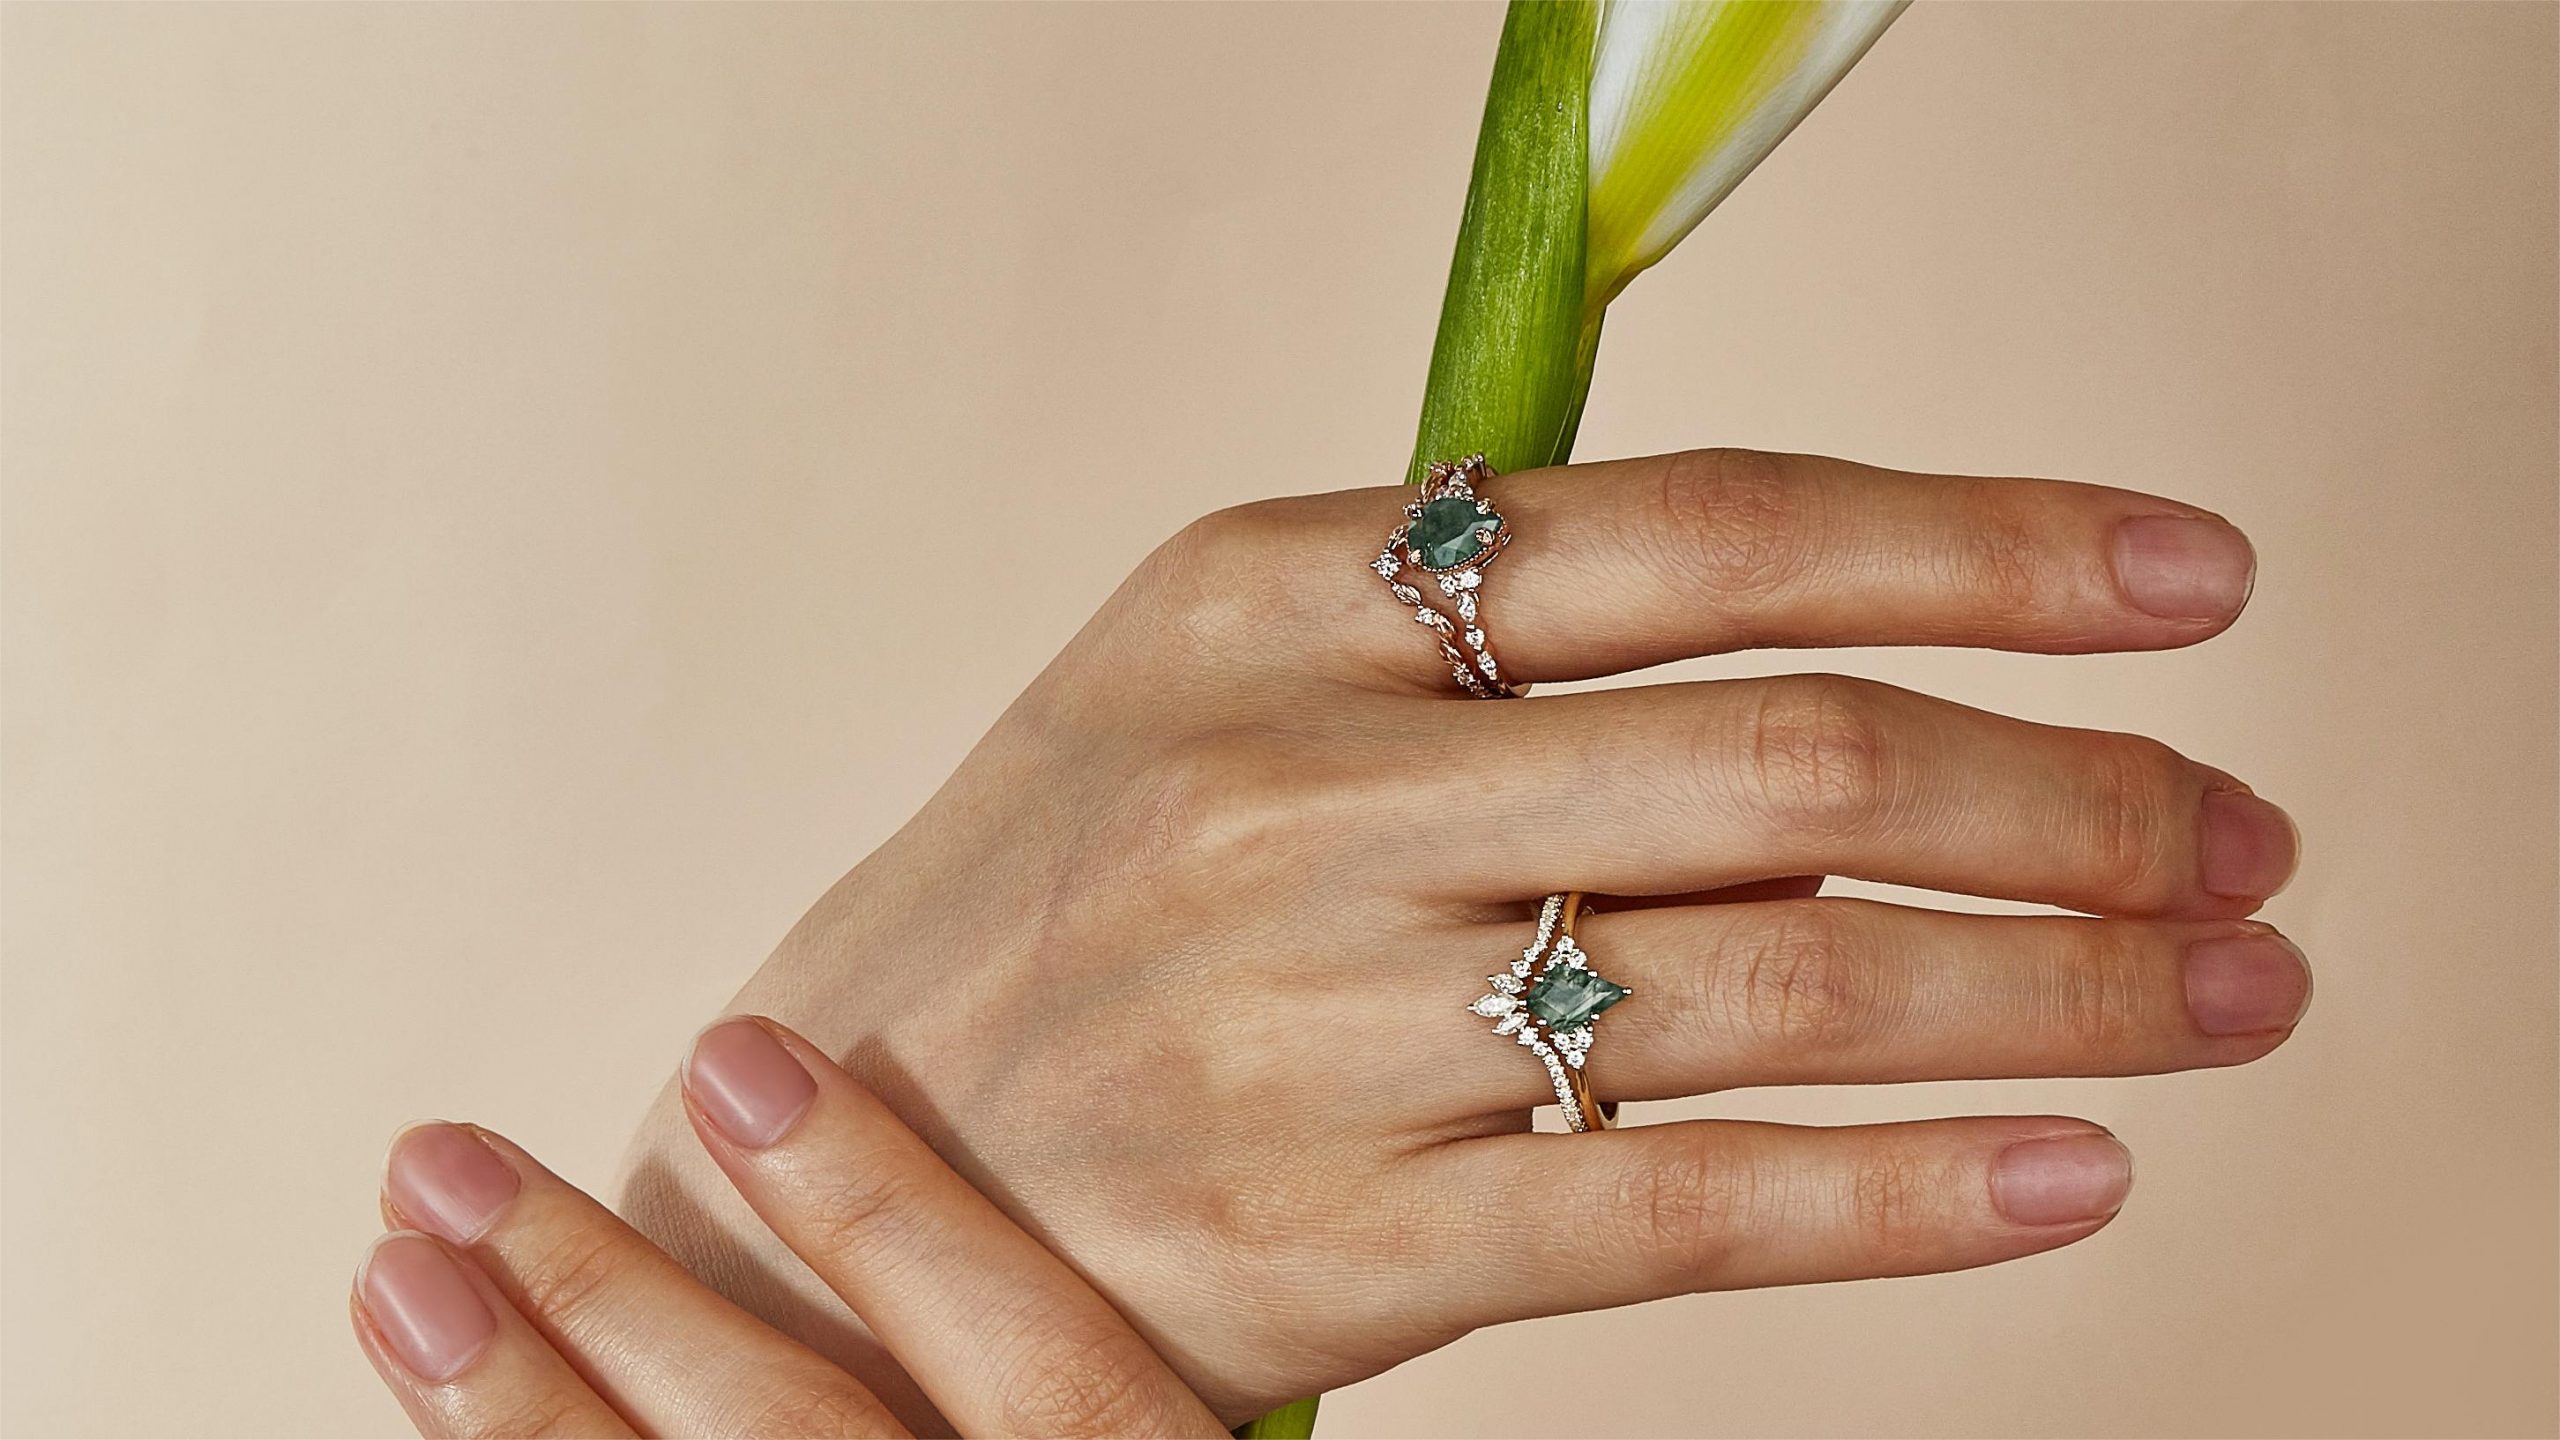 How Do Rings Inspired by Nature Evoke the Spirit of the Outdoors?